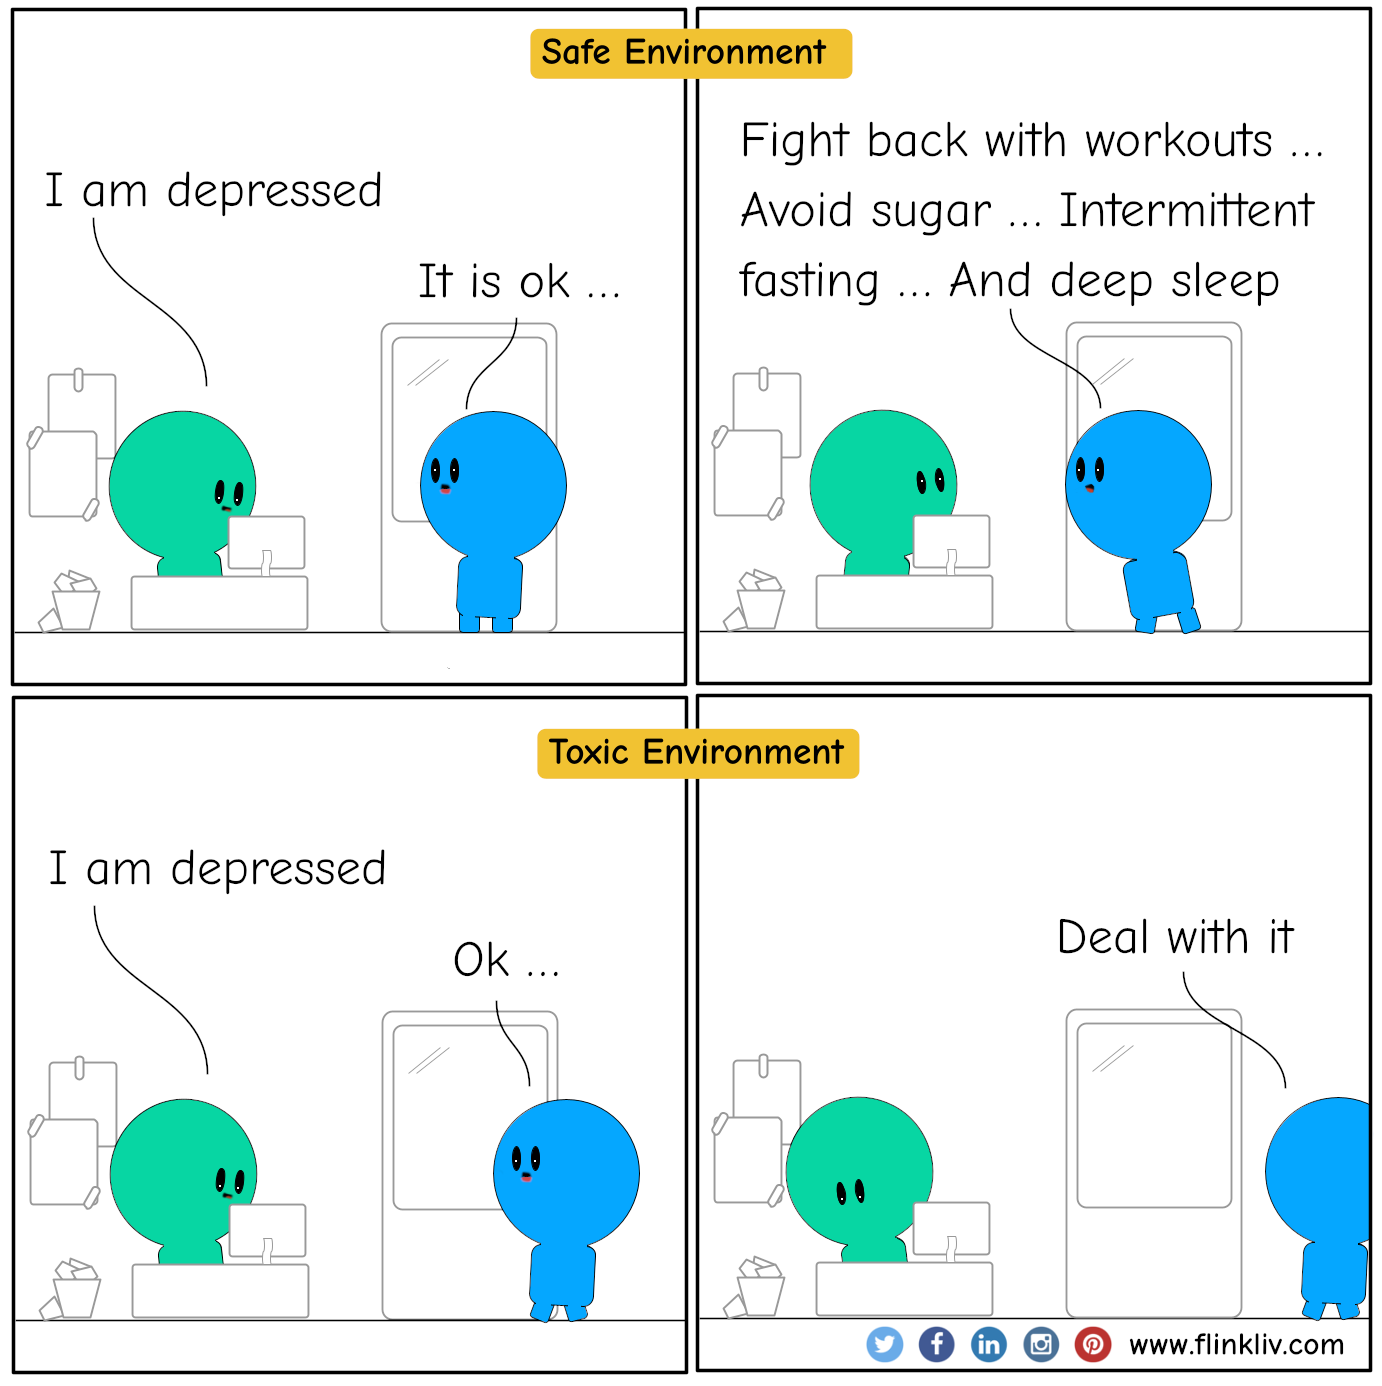 Title: Safe Environment A: I am depressed. B: It is ok; fight back with workouts, avoid sugar, intermittent fasting, and deep sleep. Title: Toxic Environment A: I am depressed. B: Ok. B:Deal with it. By flinkliv.com